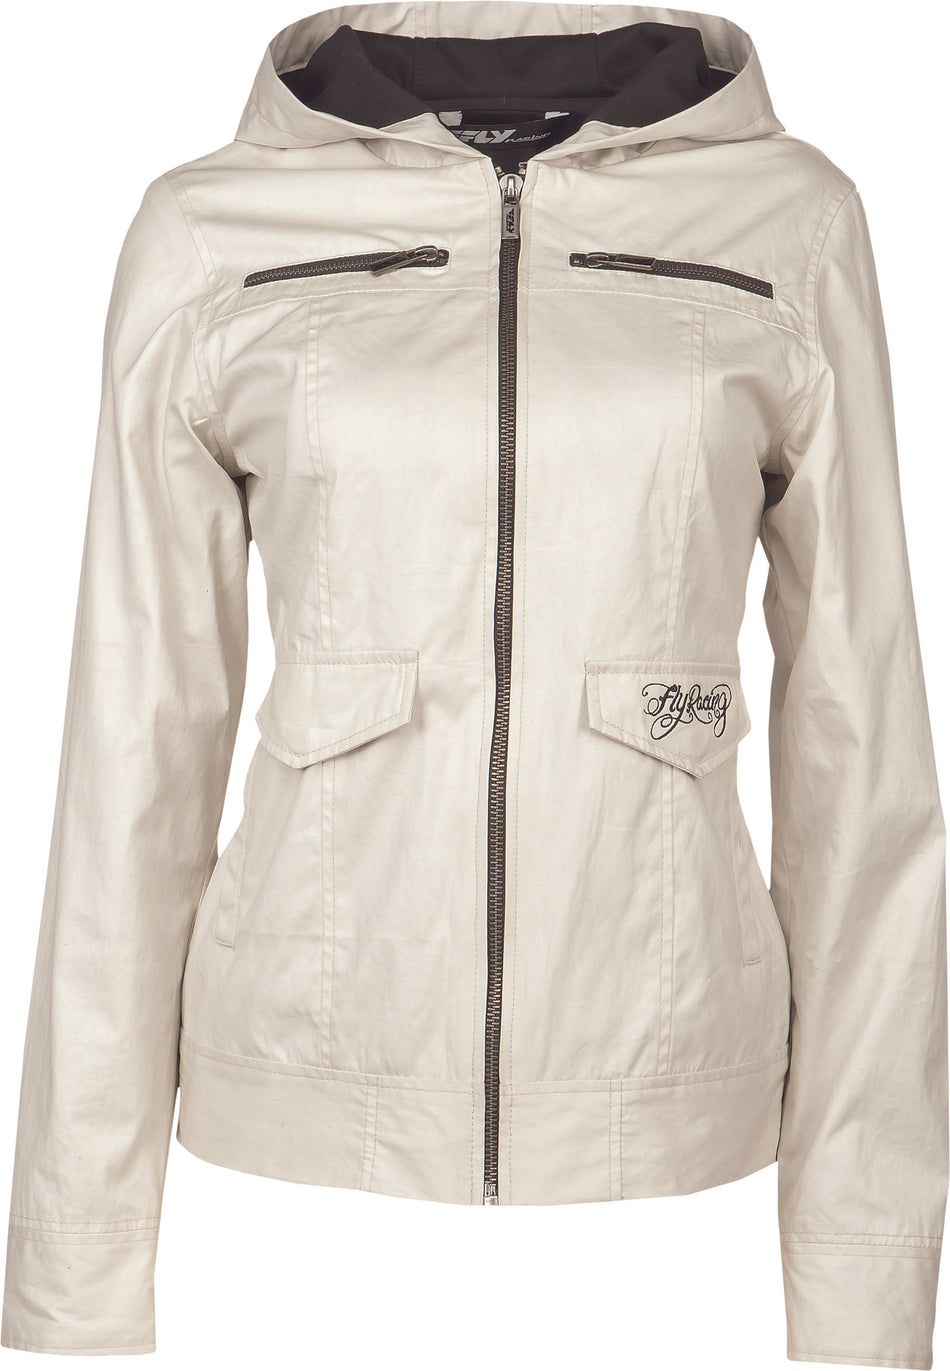 FLY RACING Fly Waxed Jacket Ivory Md Ivory M 358-5104M